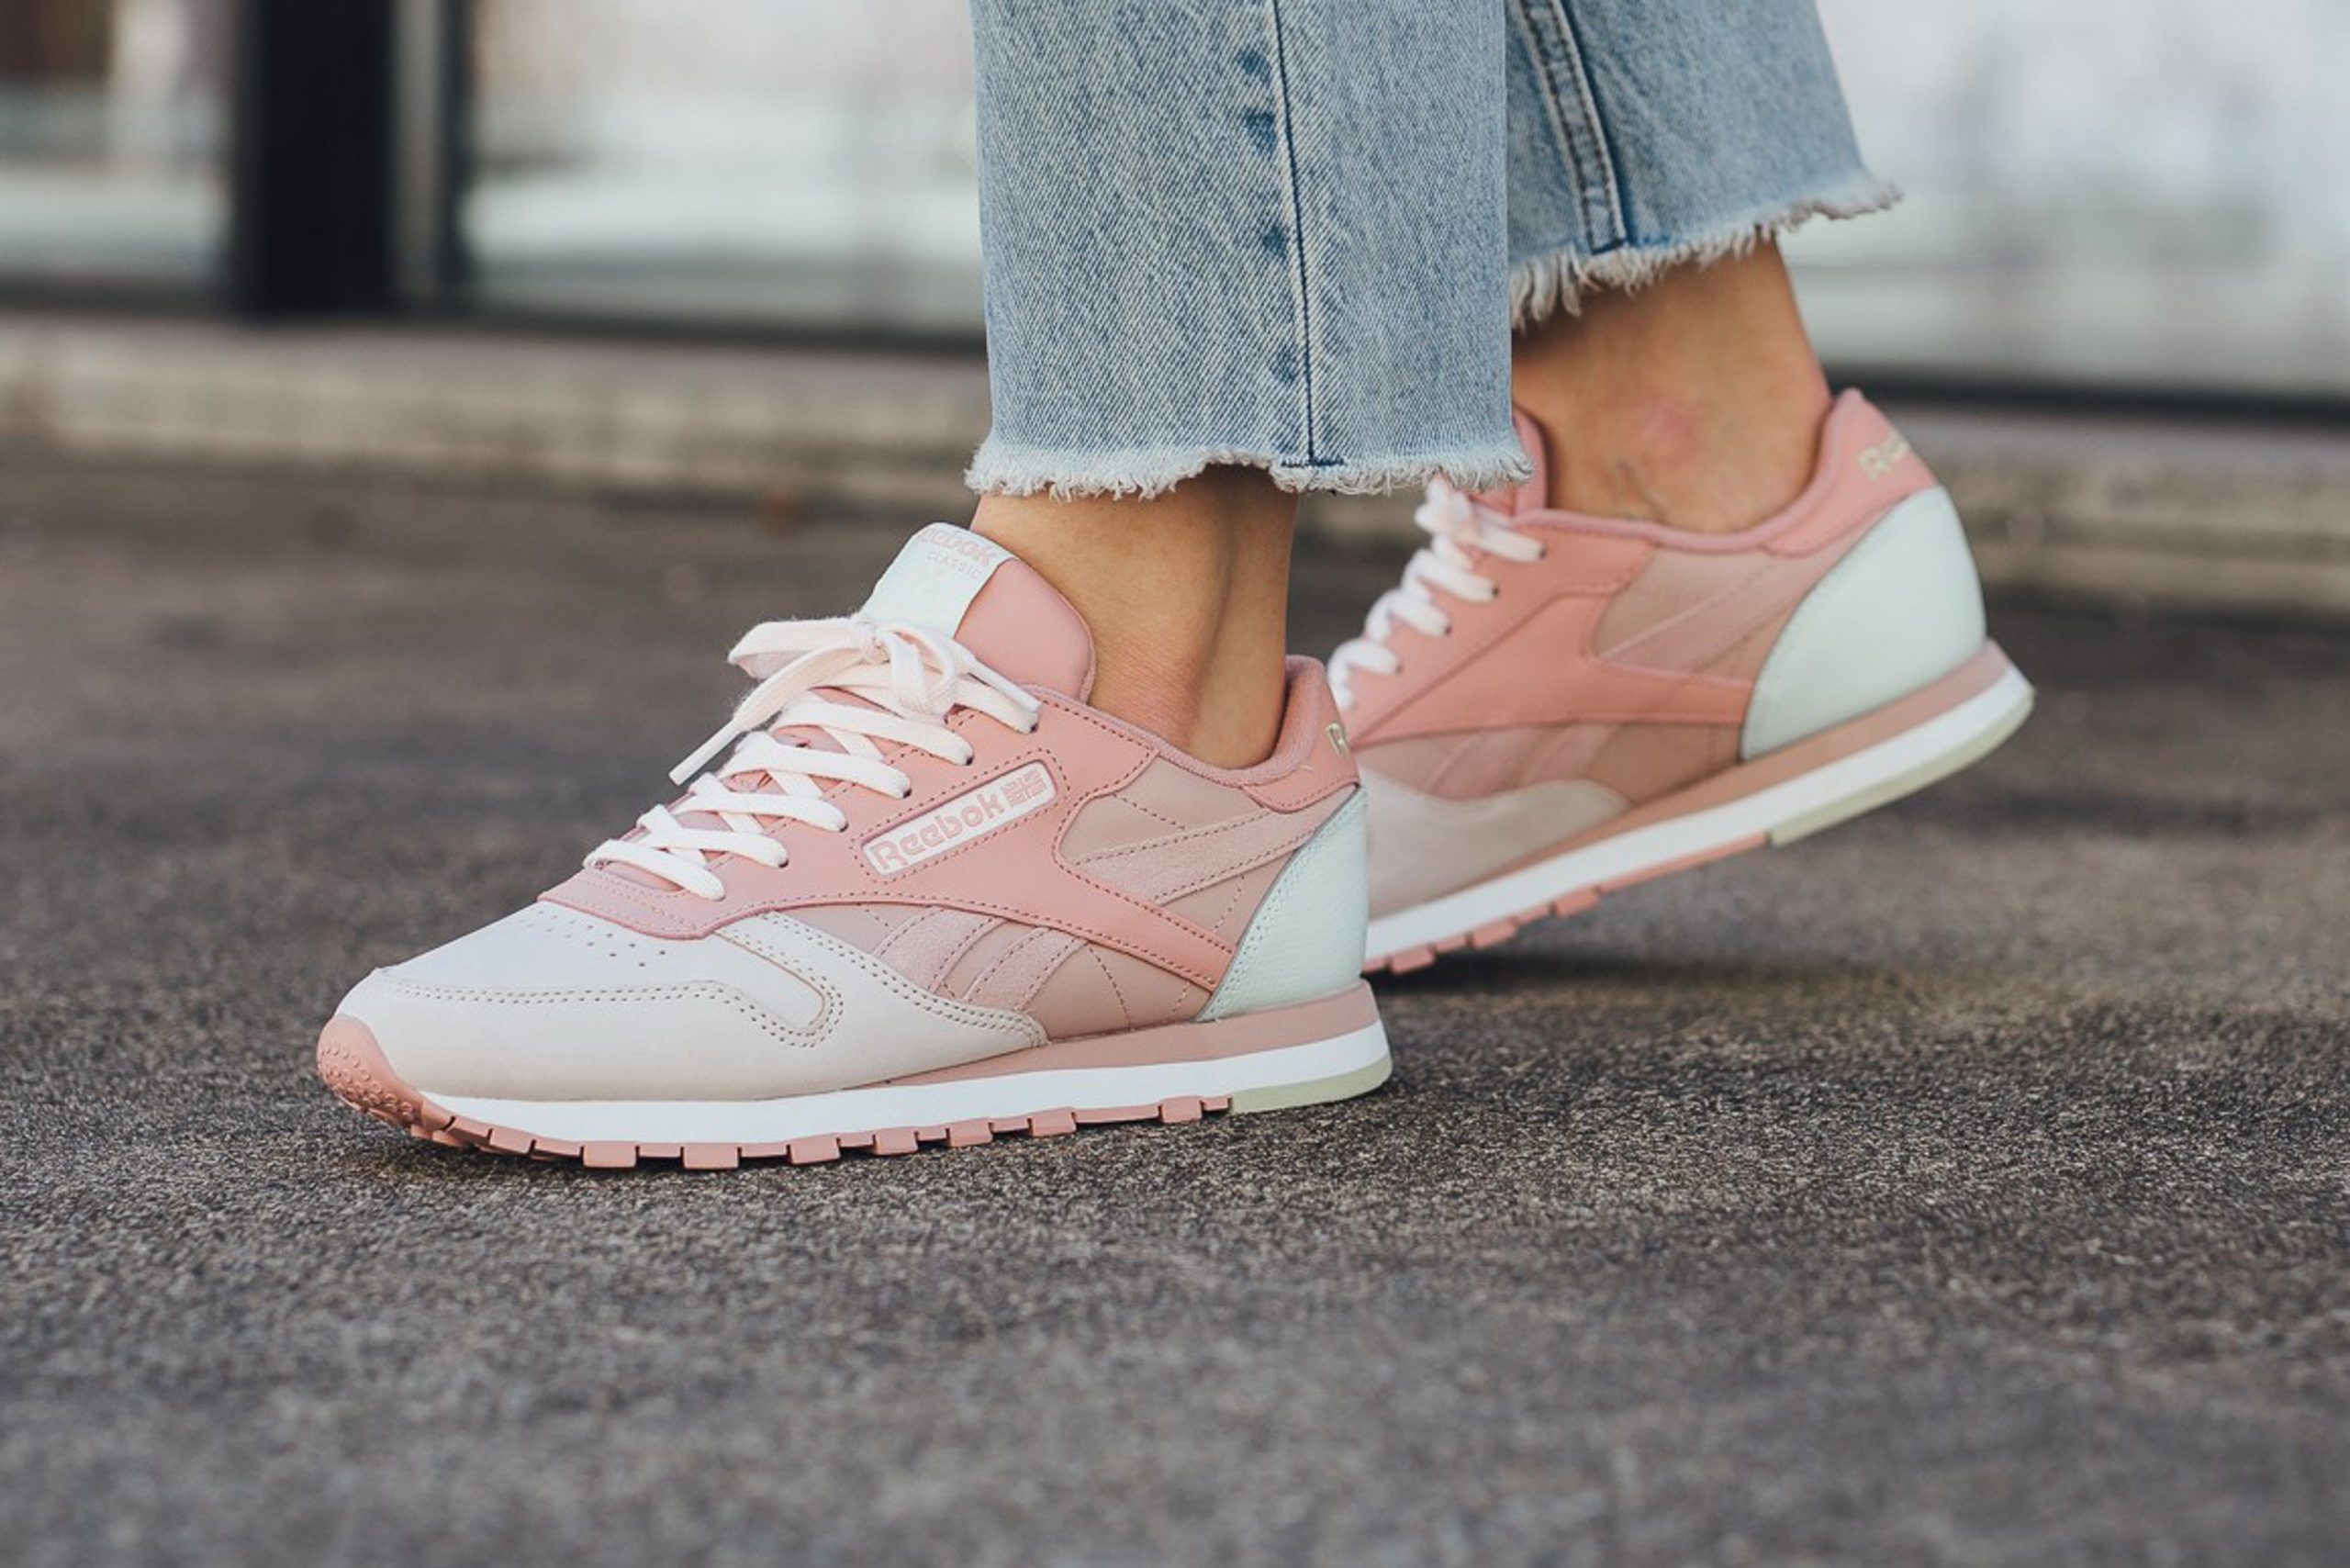 Top 5 newly launched pastel pink sneakers for girls